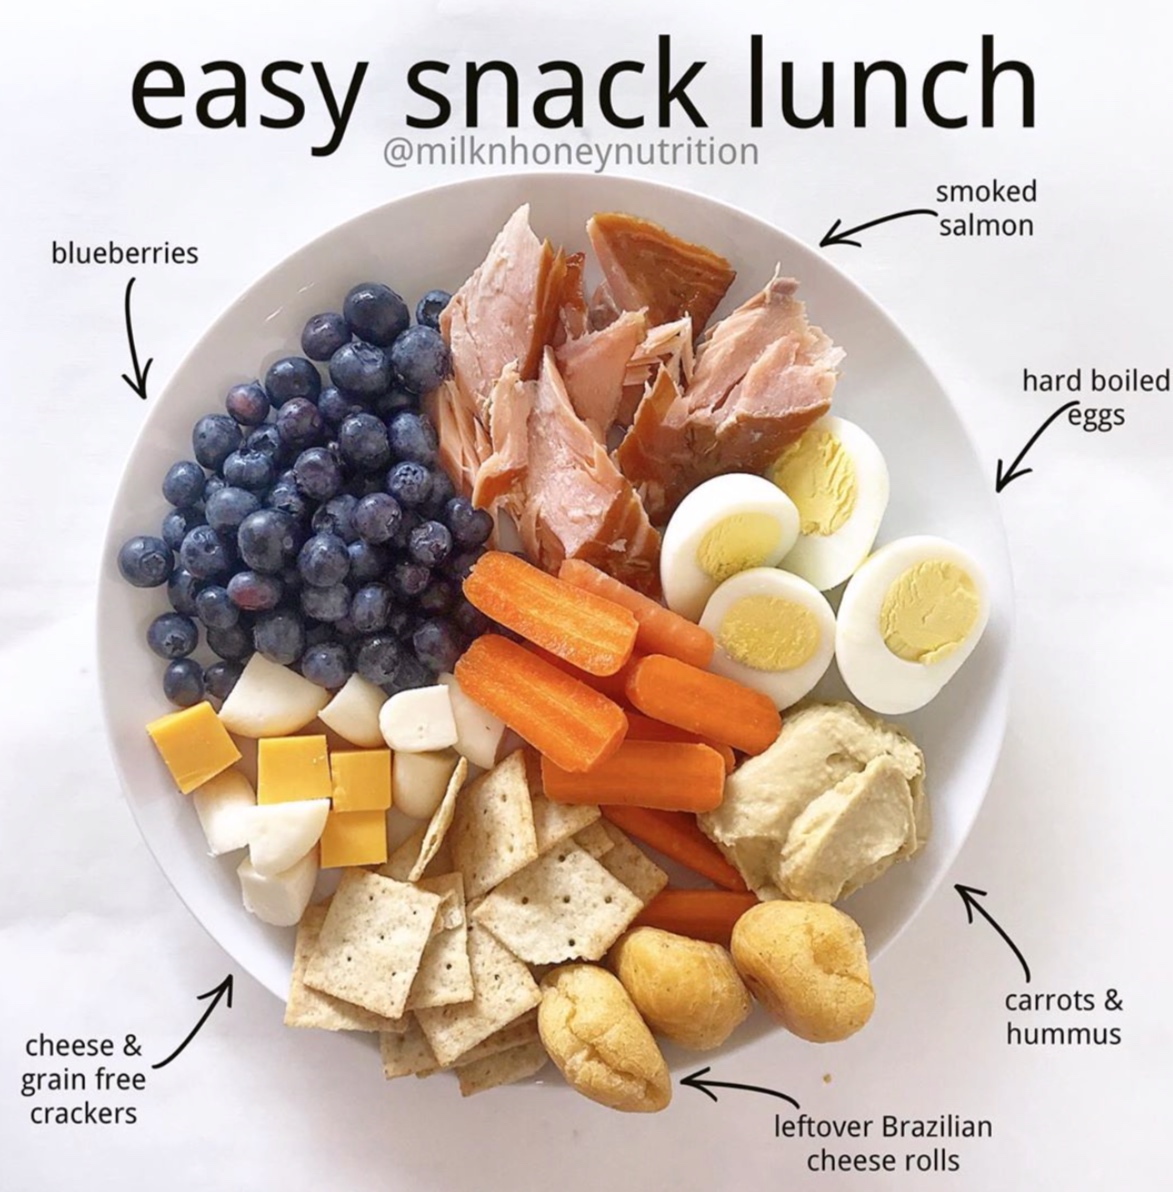 Snack lunch and snack dinner: THE 5 minute meal solution